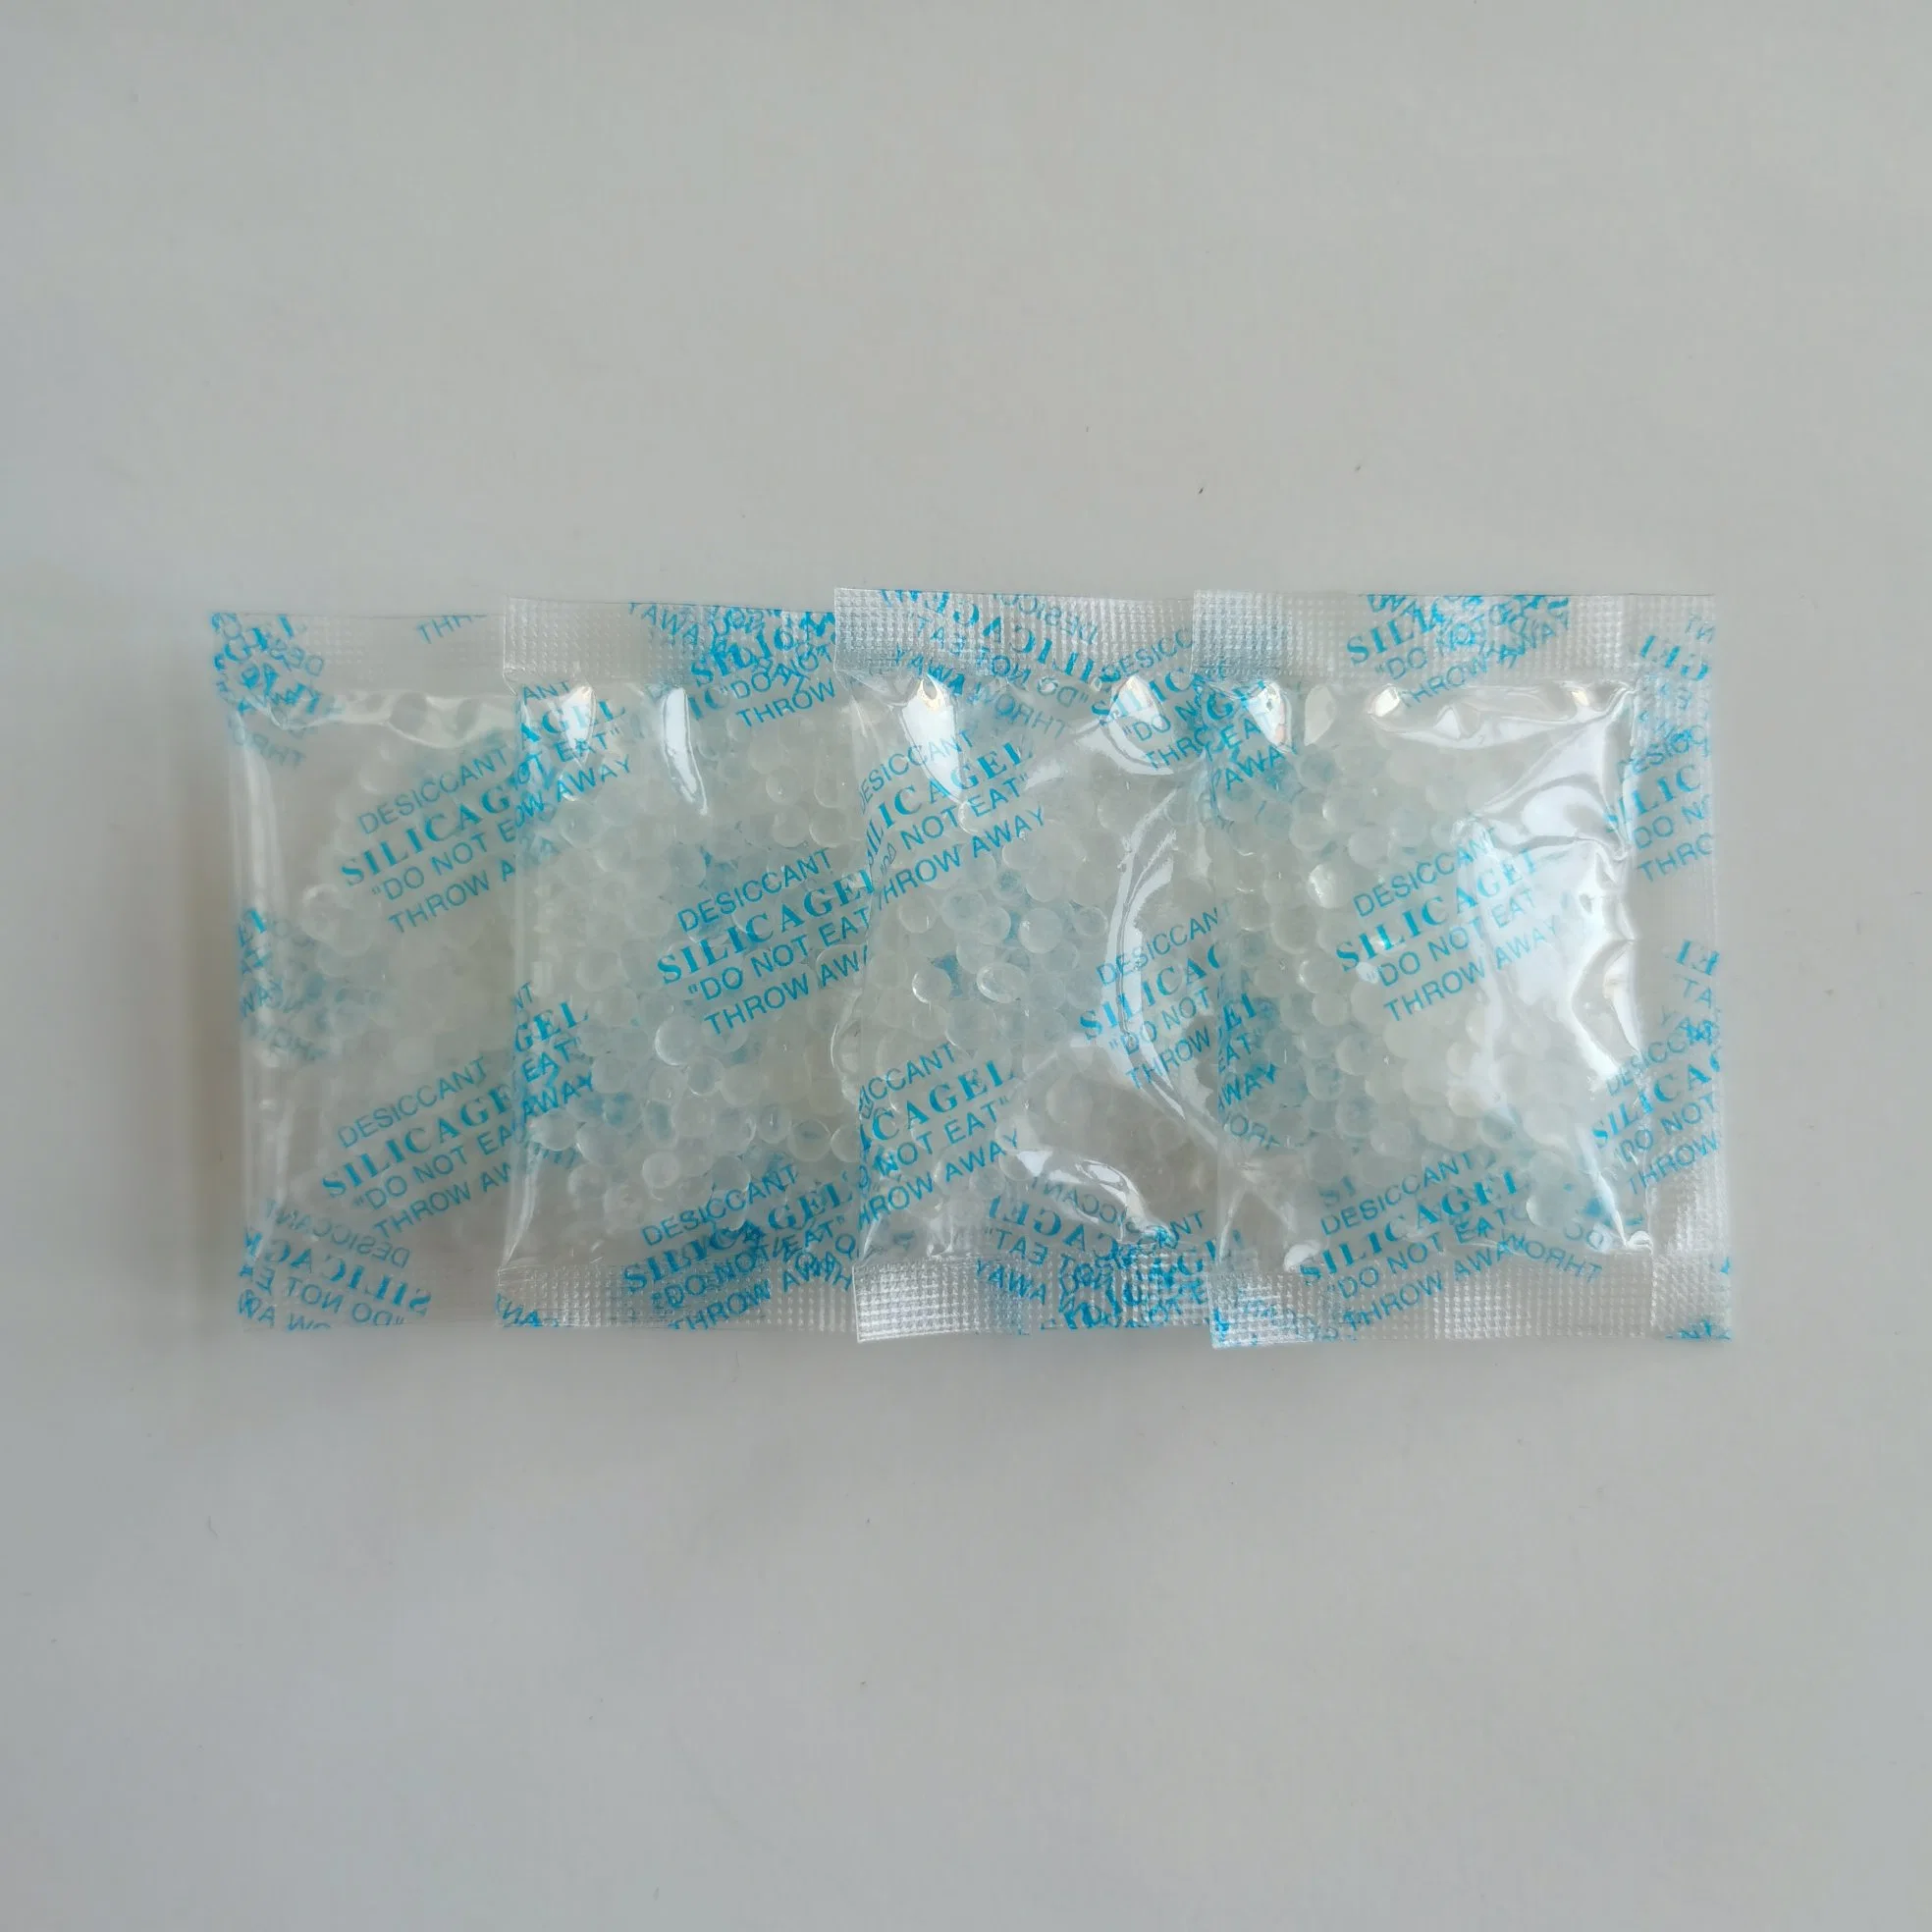 1g to 10g Food Contact DMF Free A Grade Fine Pore Silica Gel Desiccant with High Absorption